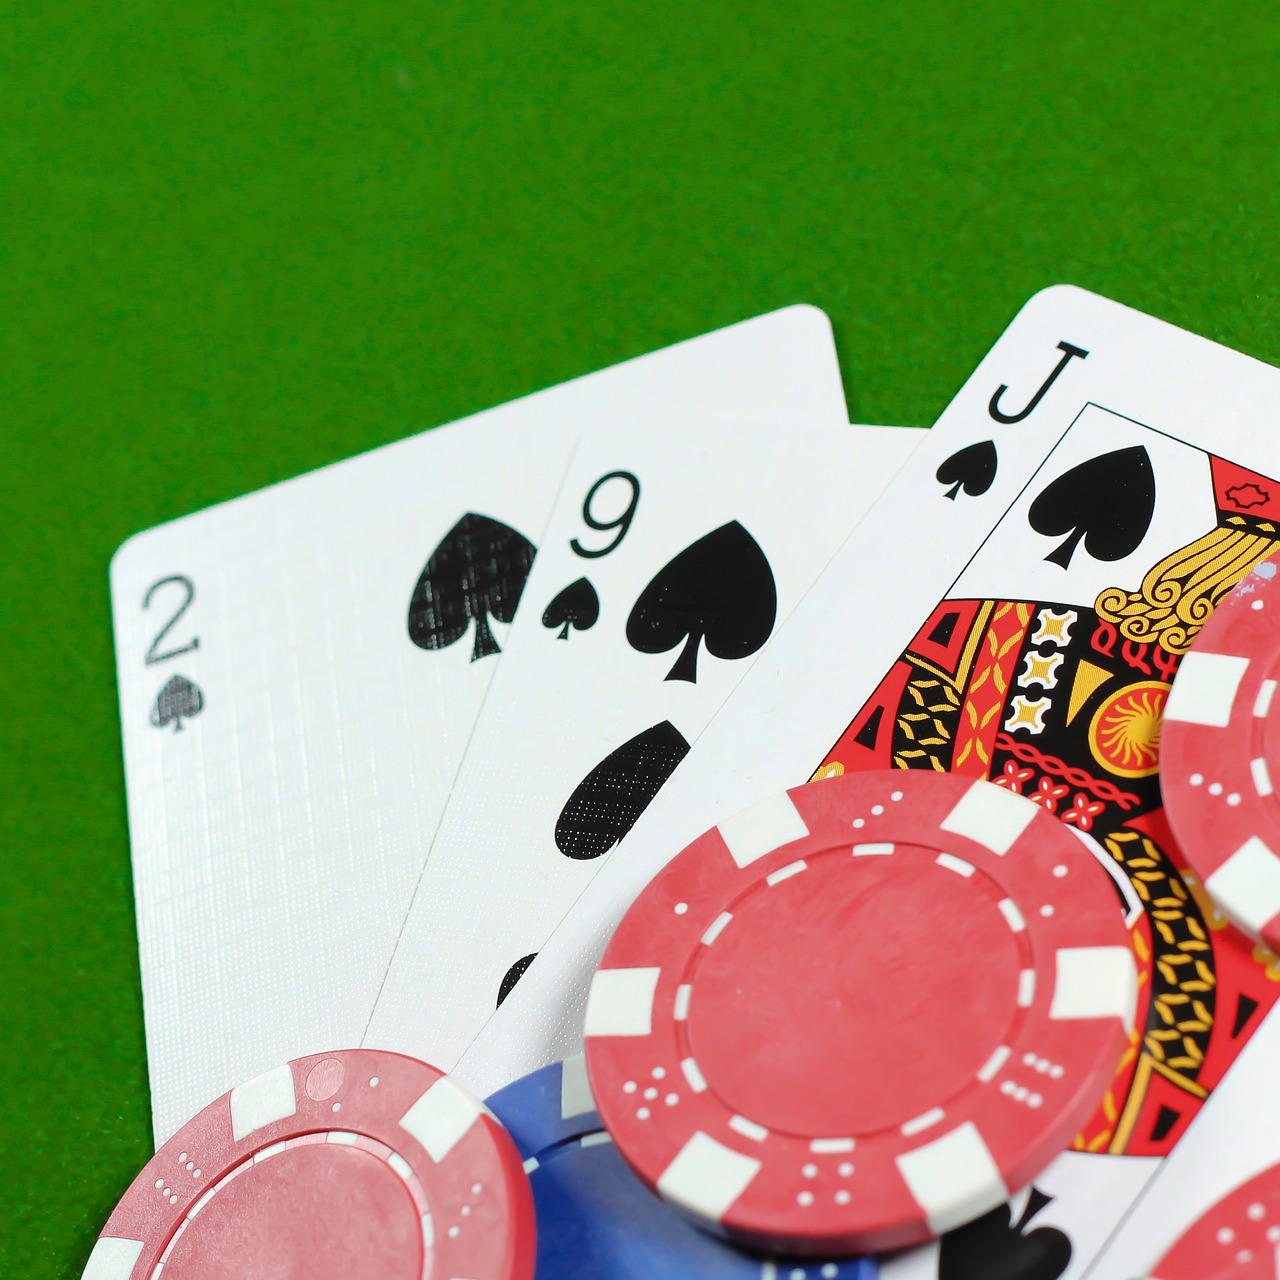 8 Quick Tips To Remember When Your Playing Against Highly Skilled Poker Players